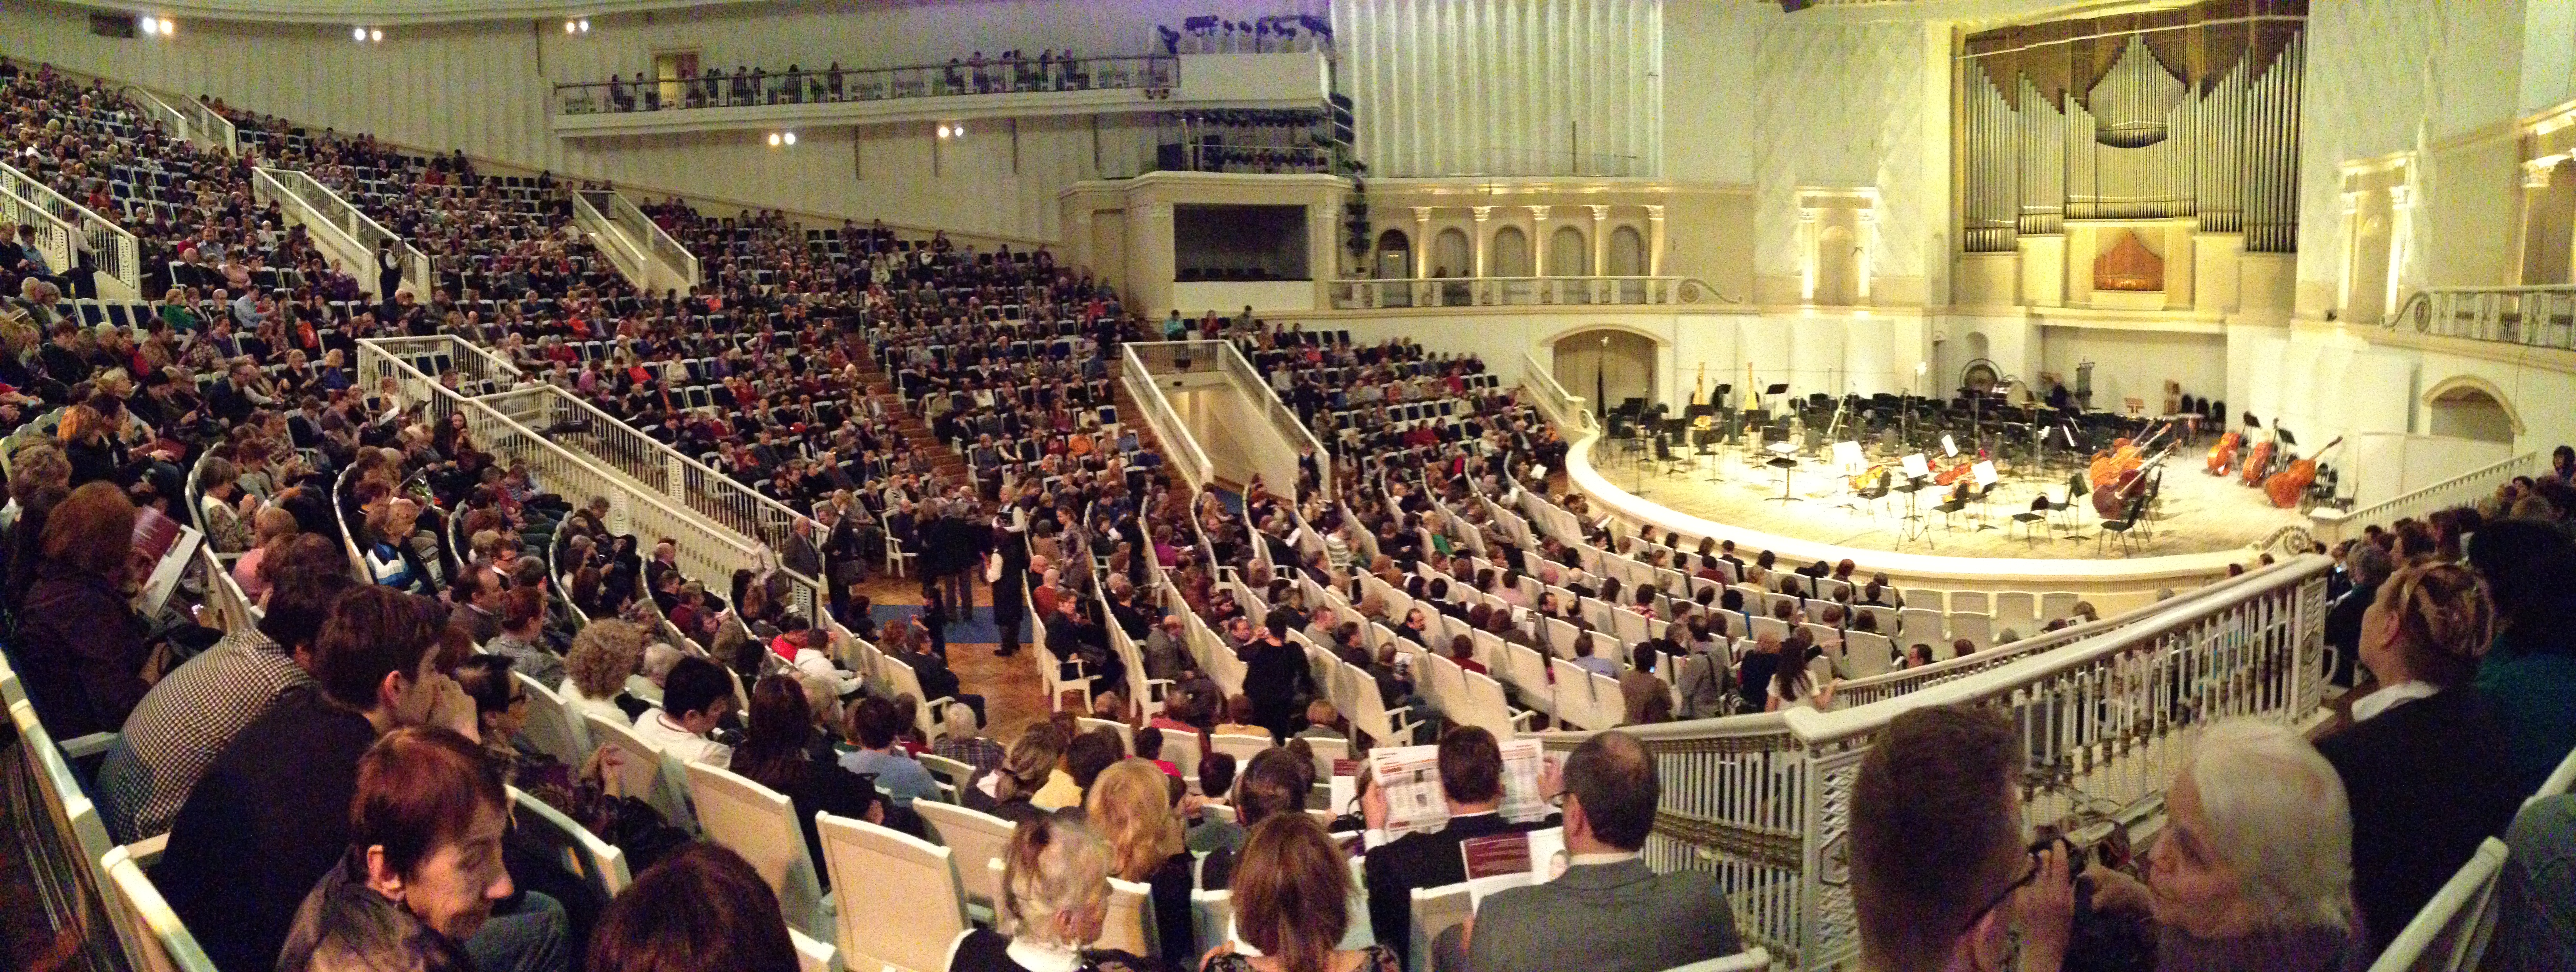 Moscow symphony.